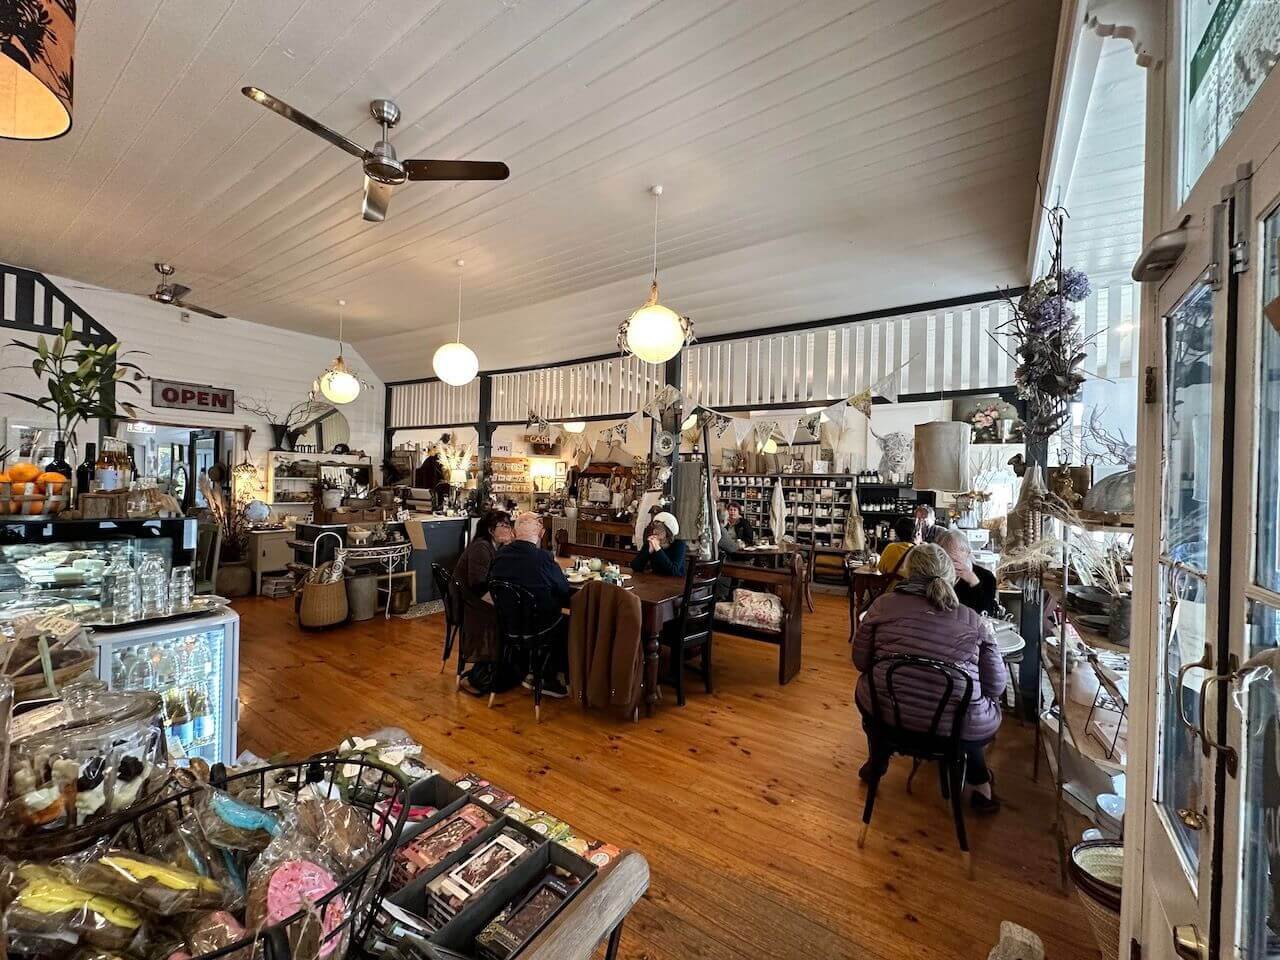 Regional Cafe And Gift Store With All The Country Charm